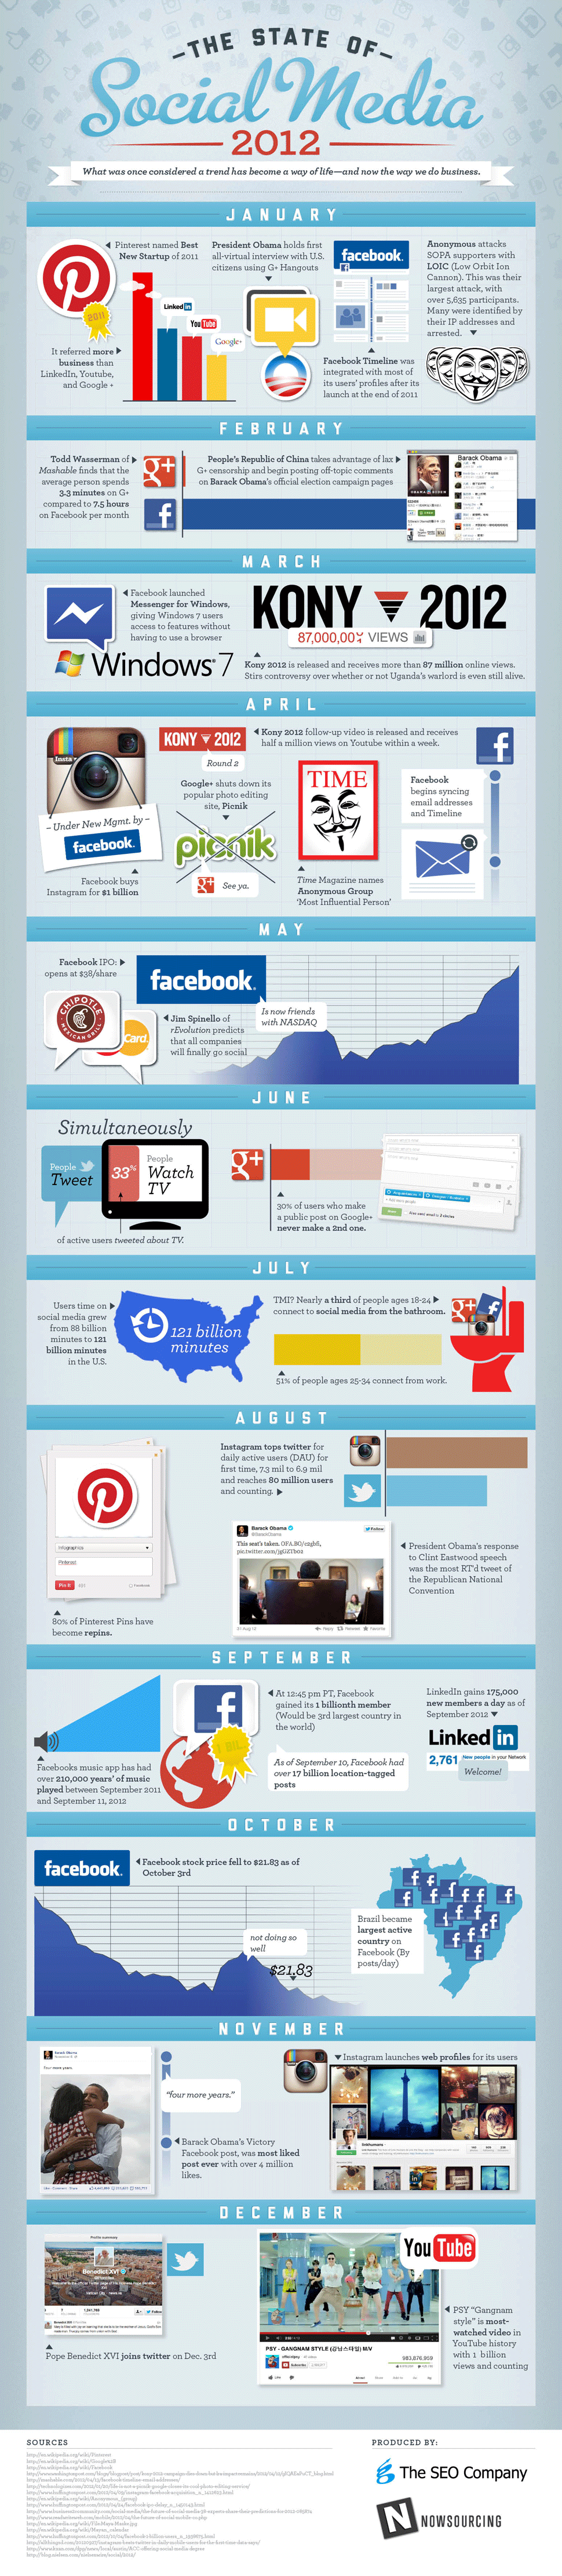 The State of Social Media 2012 by The SEO Company